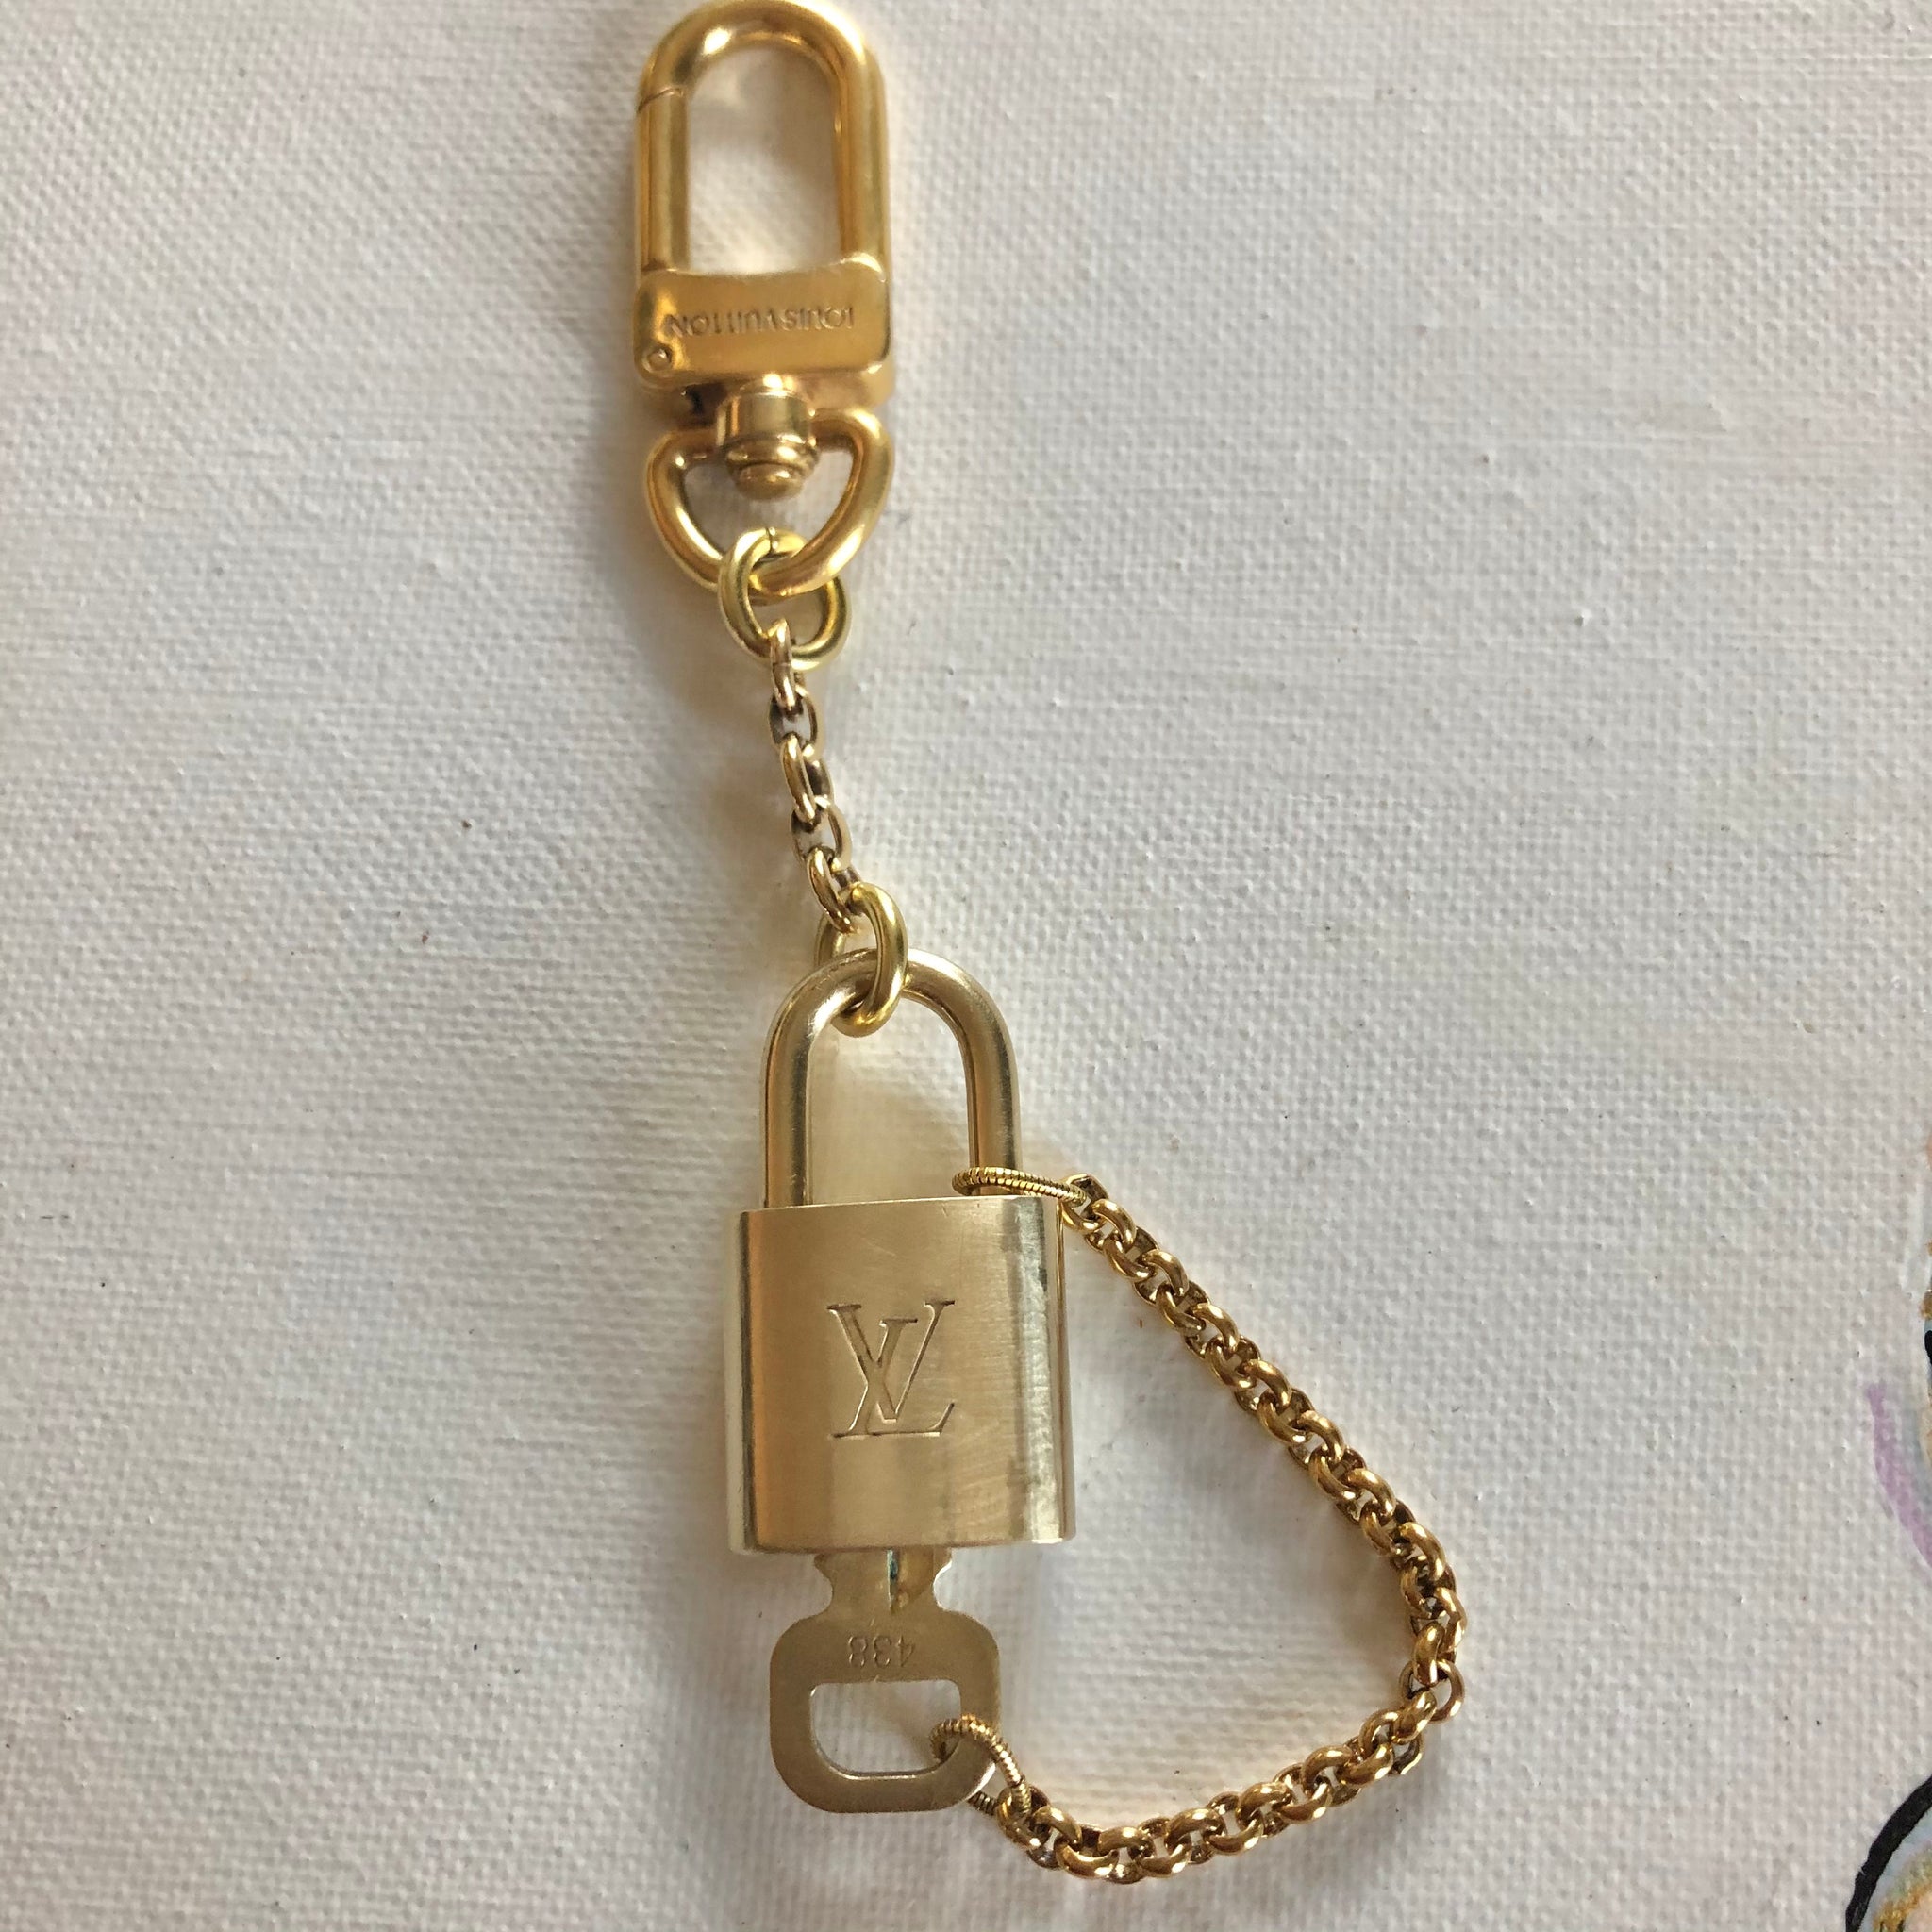 Authentic gold Louis Vuitton lock, was previously